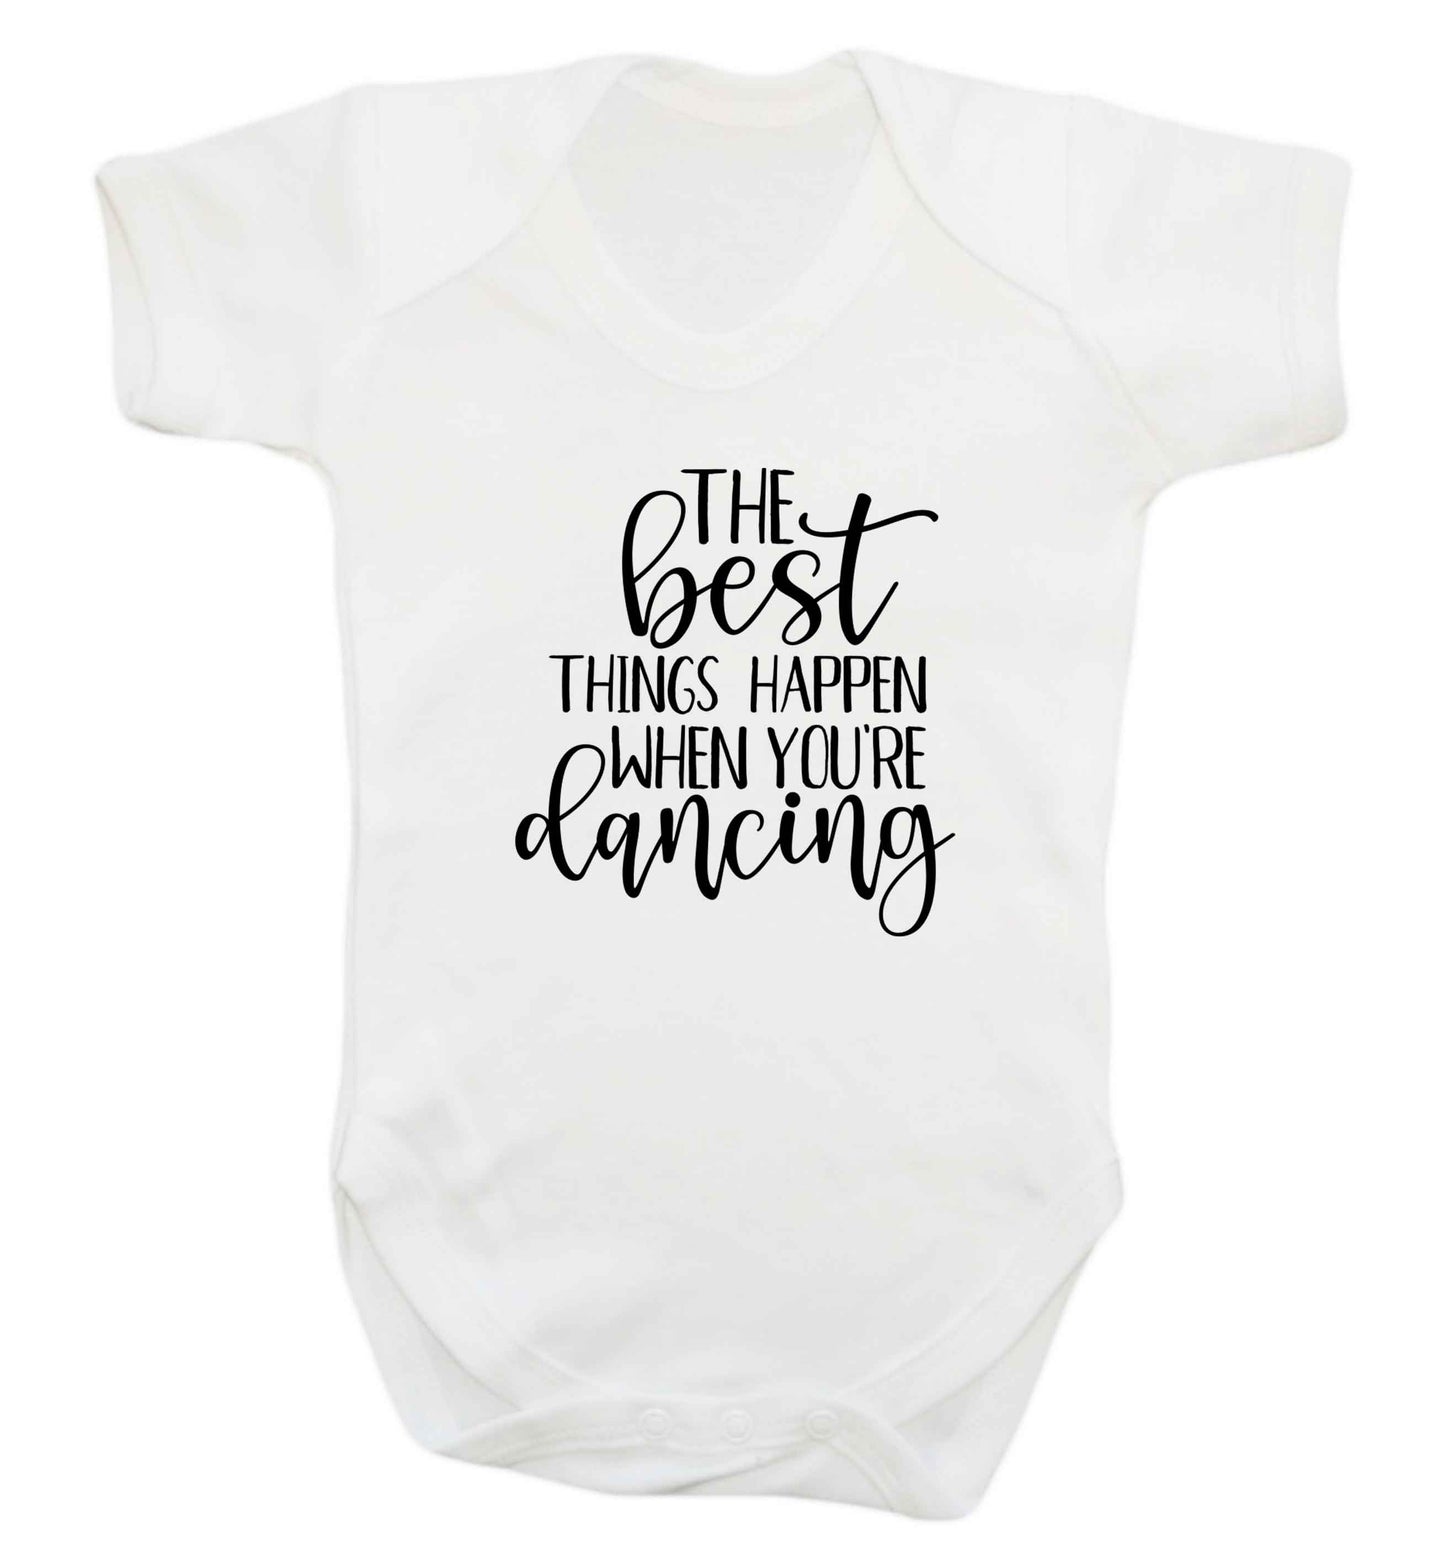 Best Things Happen Dancing baby vest white 18-24 months